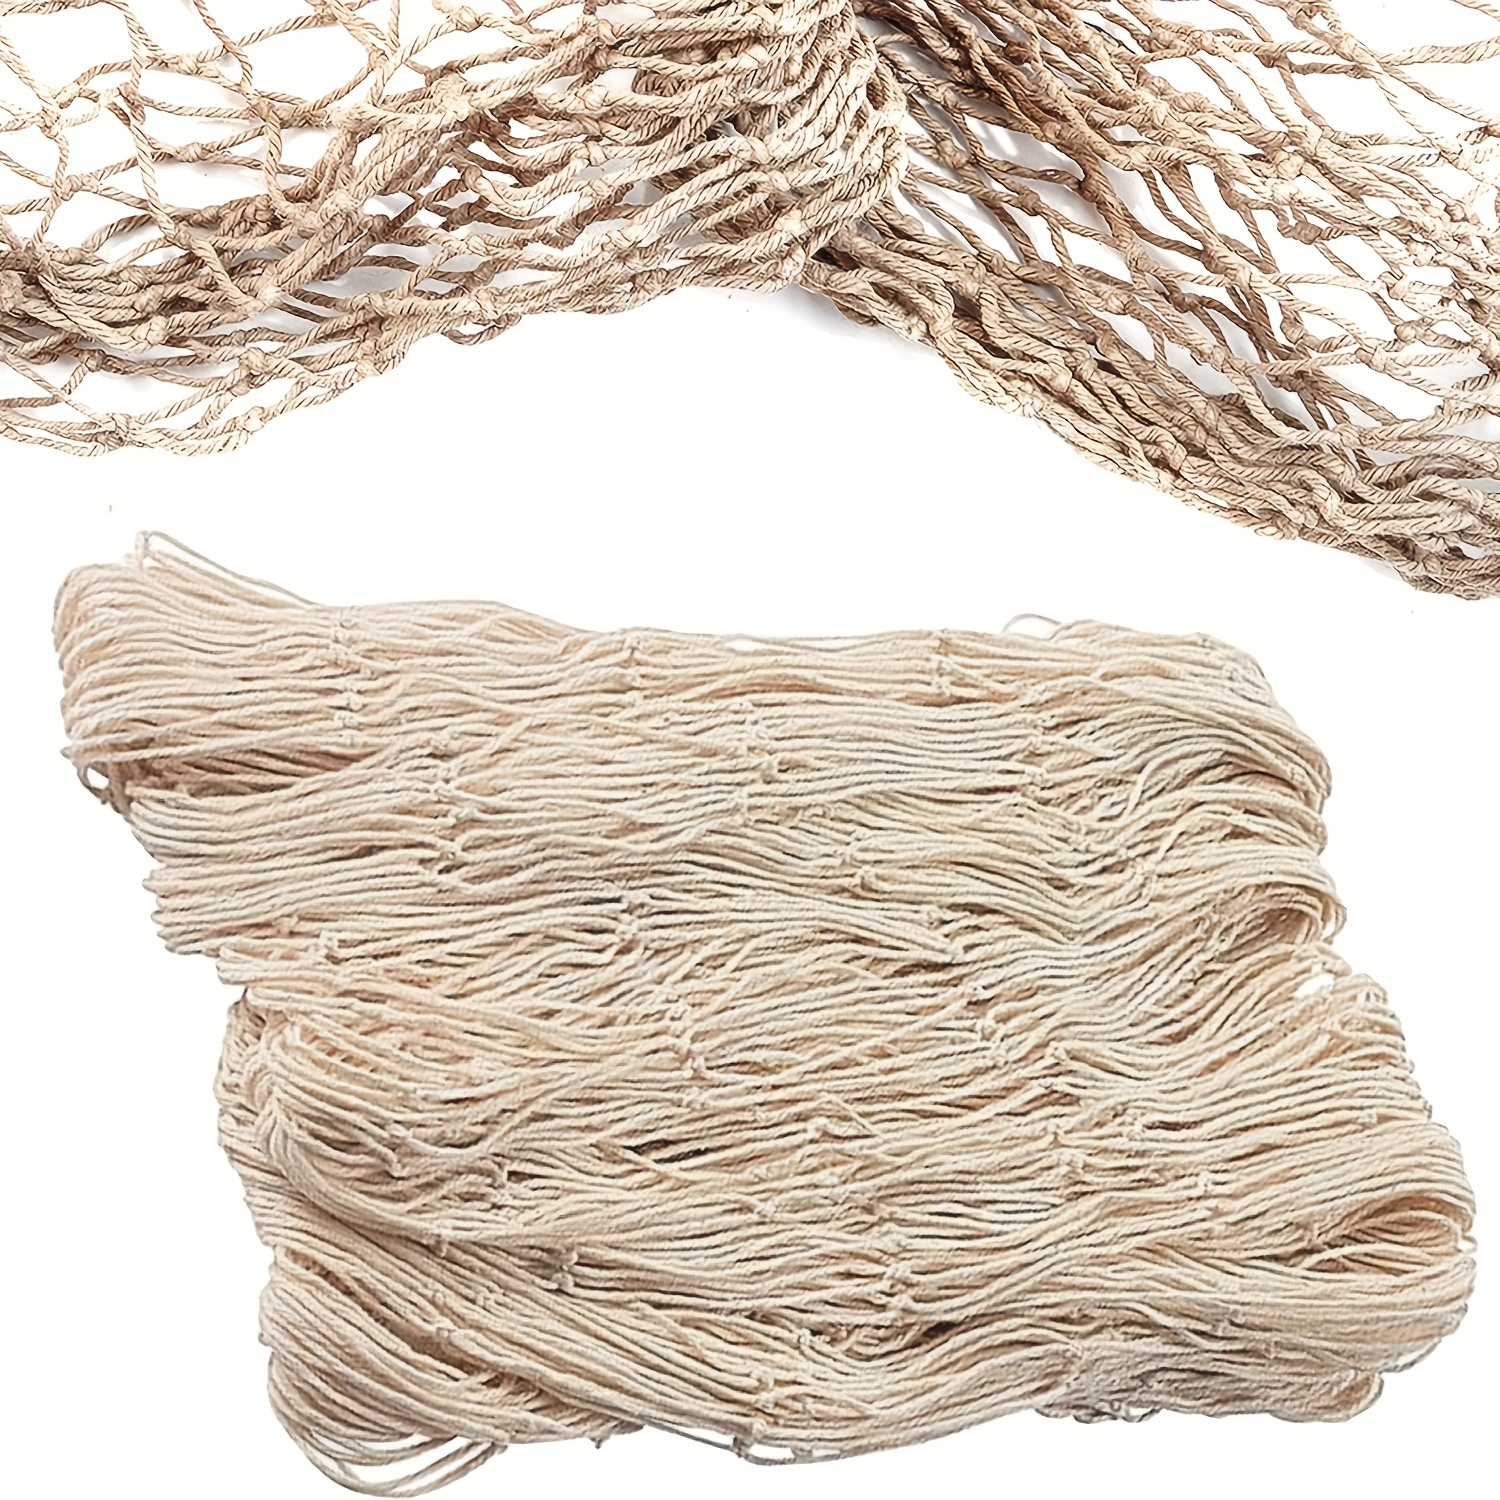 Mediterranean Style Fishing Net With Thick Thread Decoration